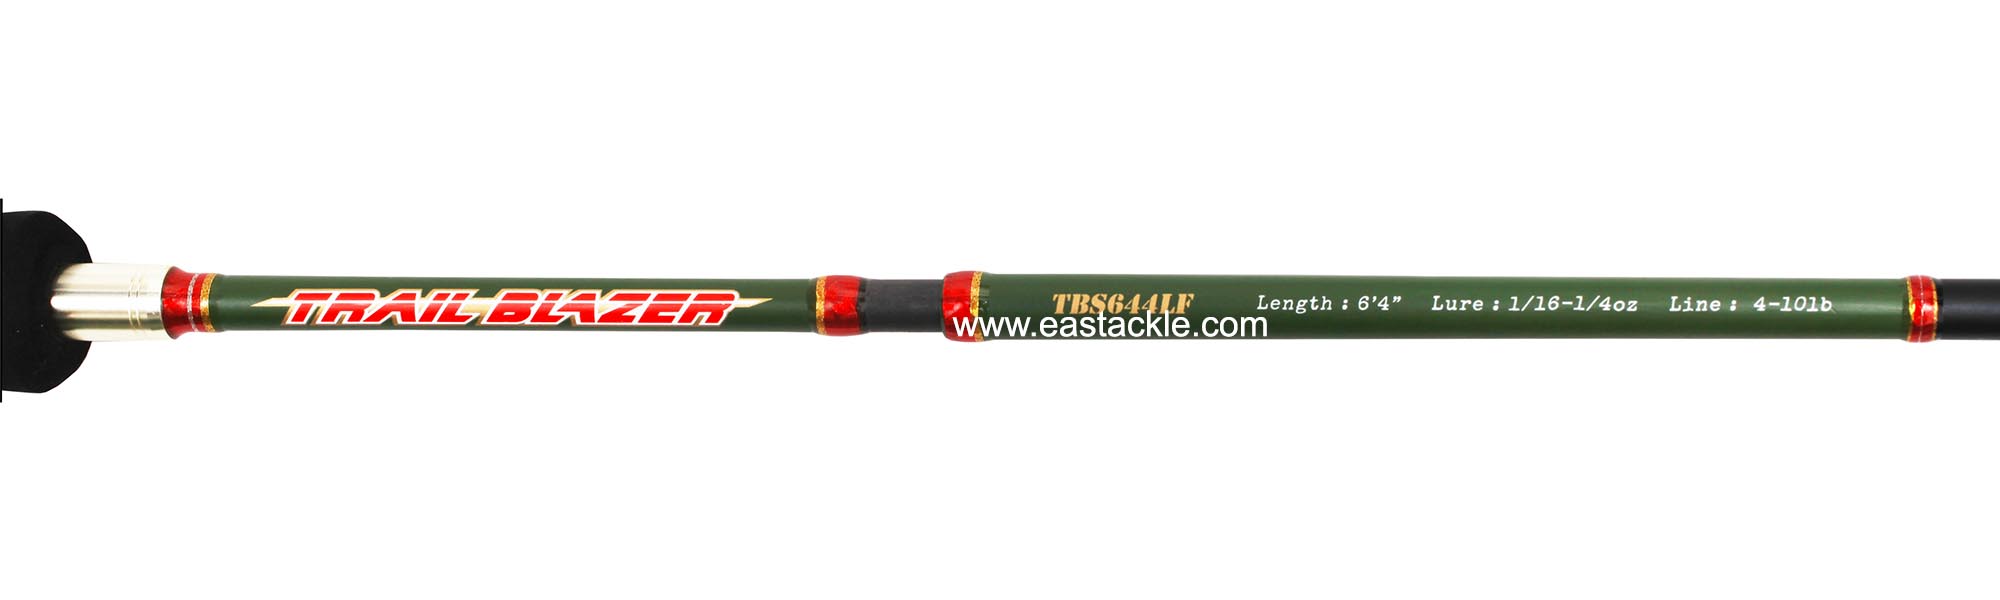 Rapala - Trail Blazer - TRS664LF - Spinning 4 Piece Travel Rod - Logo and Specifications | Eastackle